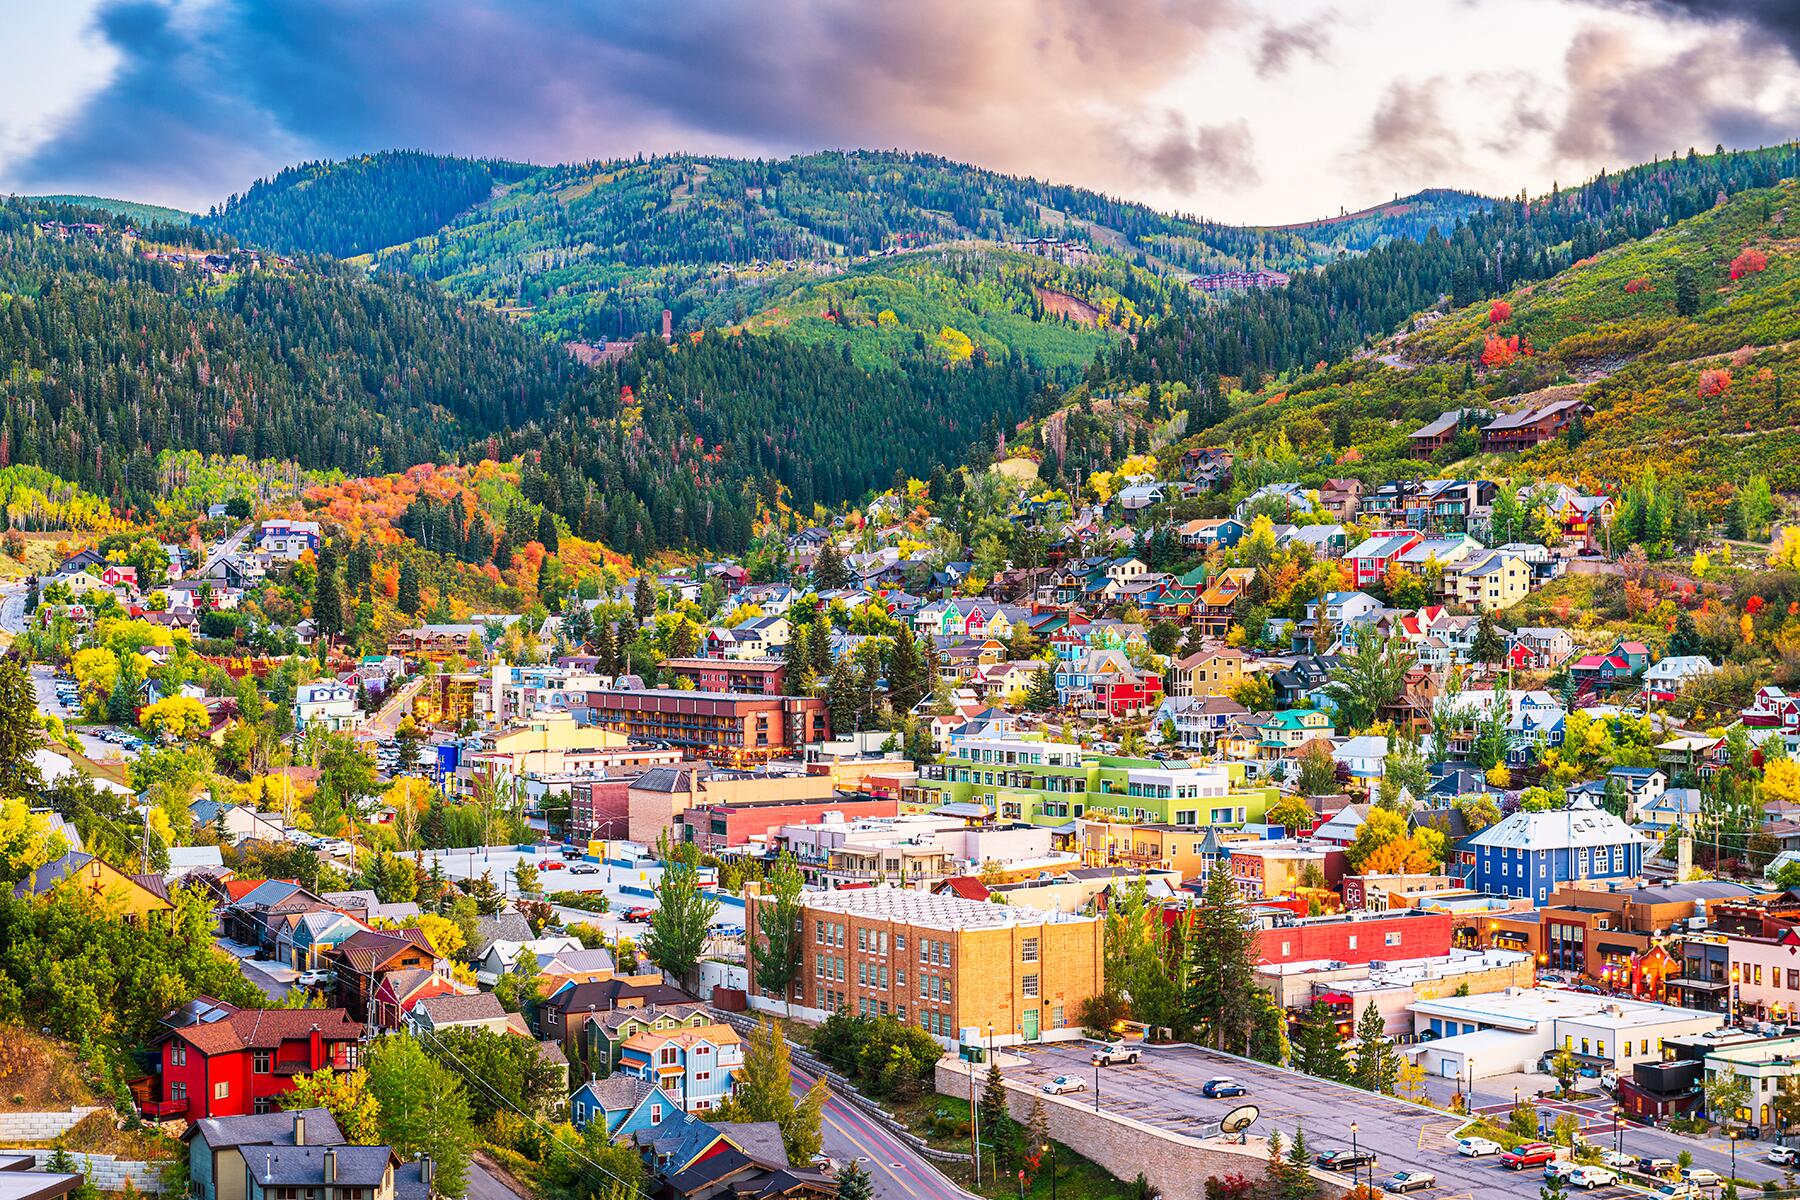 <a href='https://www.fodors.com/world/north-america/usa/utah/experiences/news/photos/ultimate-things-to-do-in-utah#'>From &quot;25 Ultimate Things to Do in Utah: Party Like an Out-of-Towner in Park City&quot;</a>